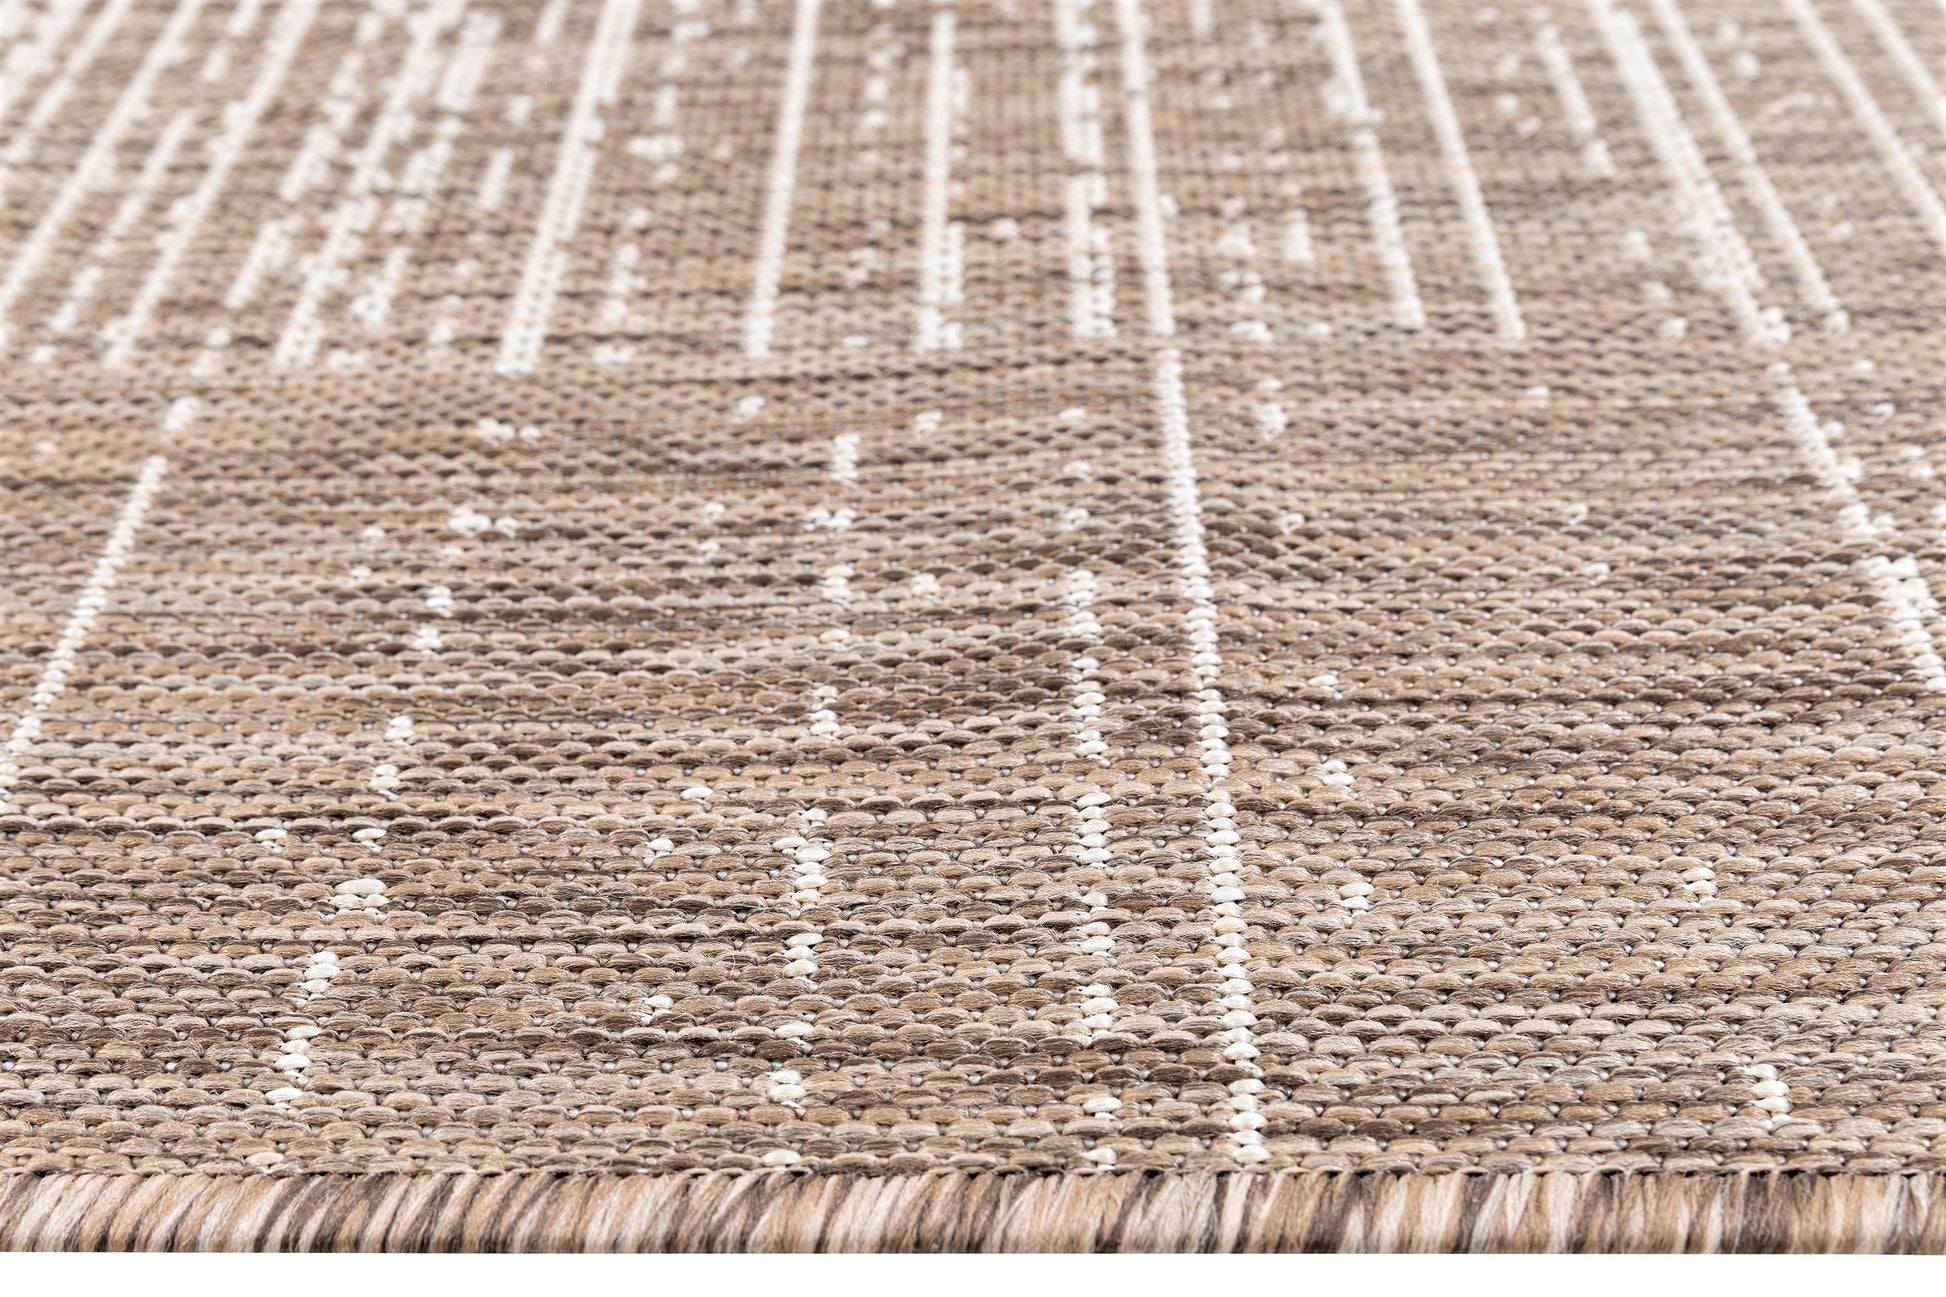 Revere Sand Ivory Striped Distressed Indoor/Outdoor Rug